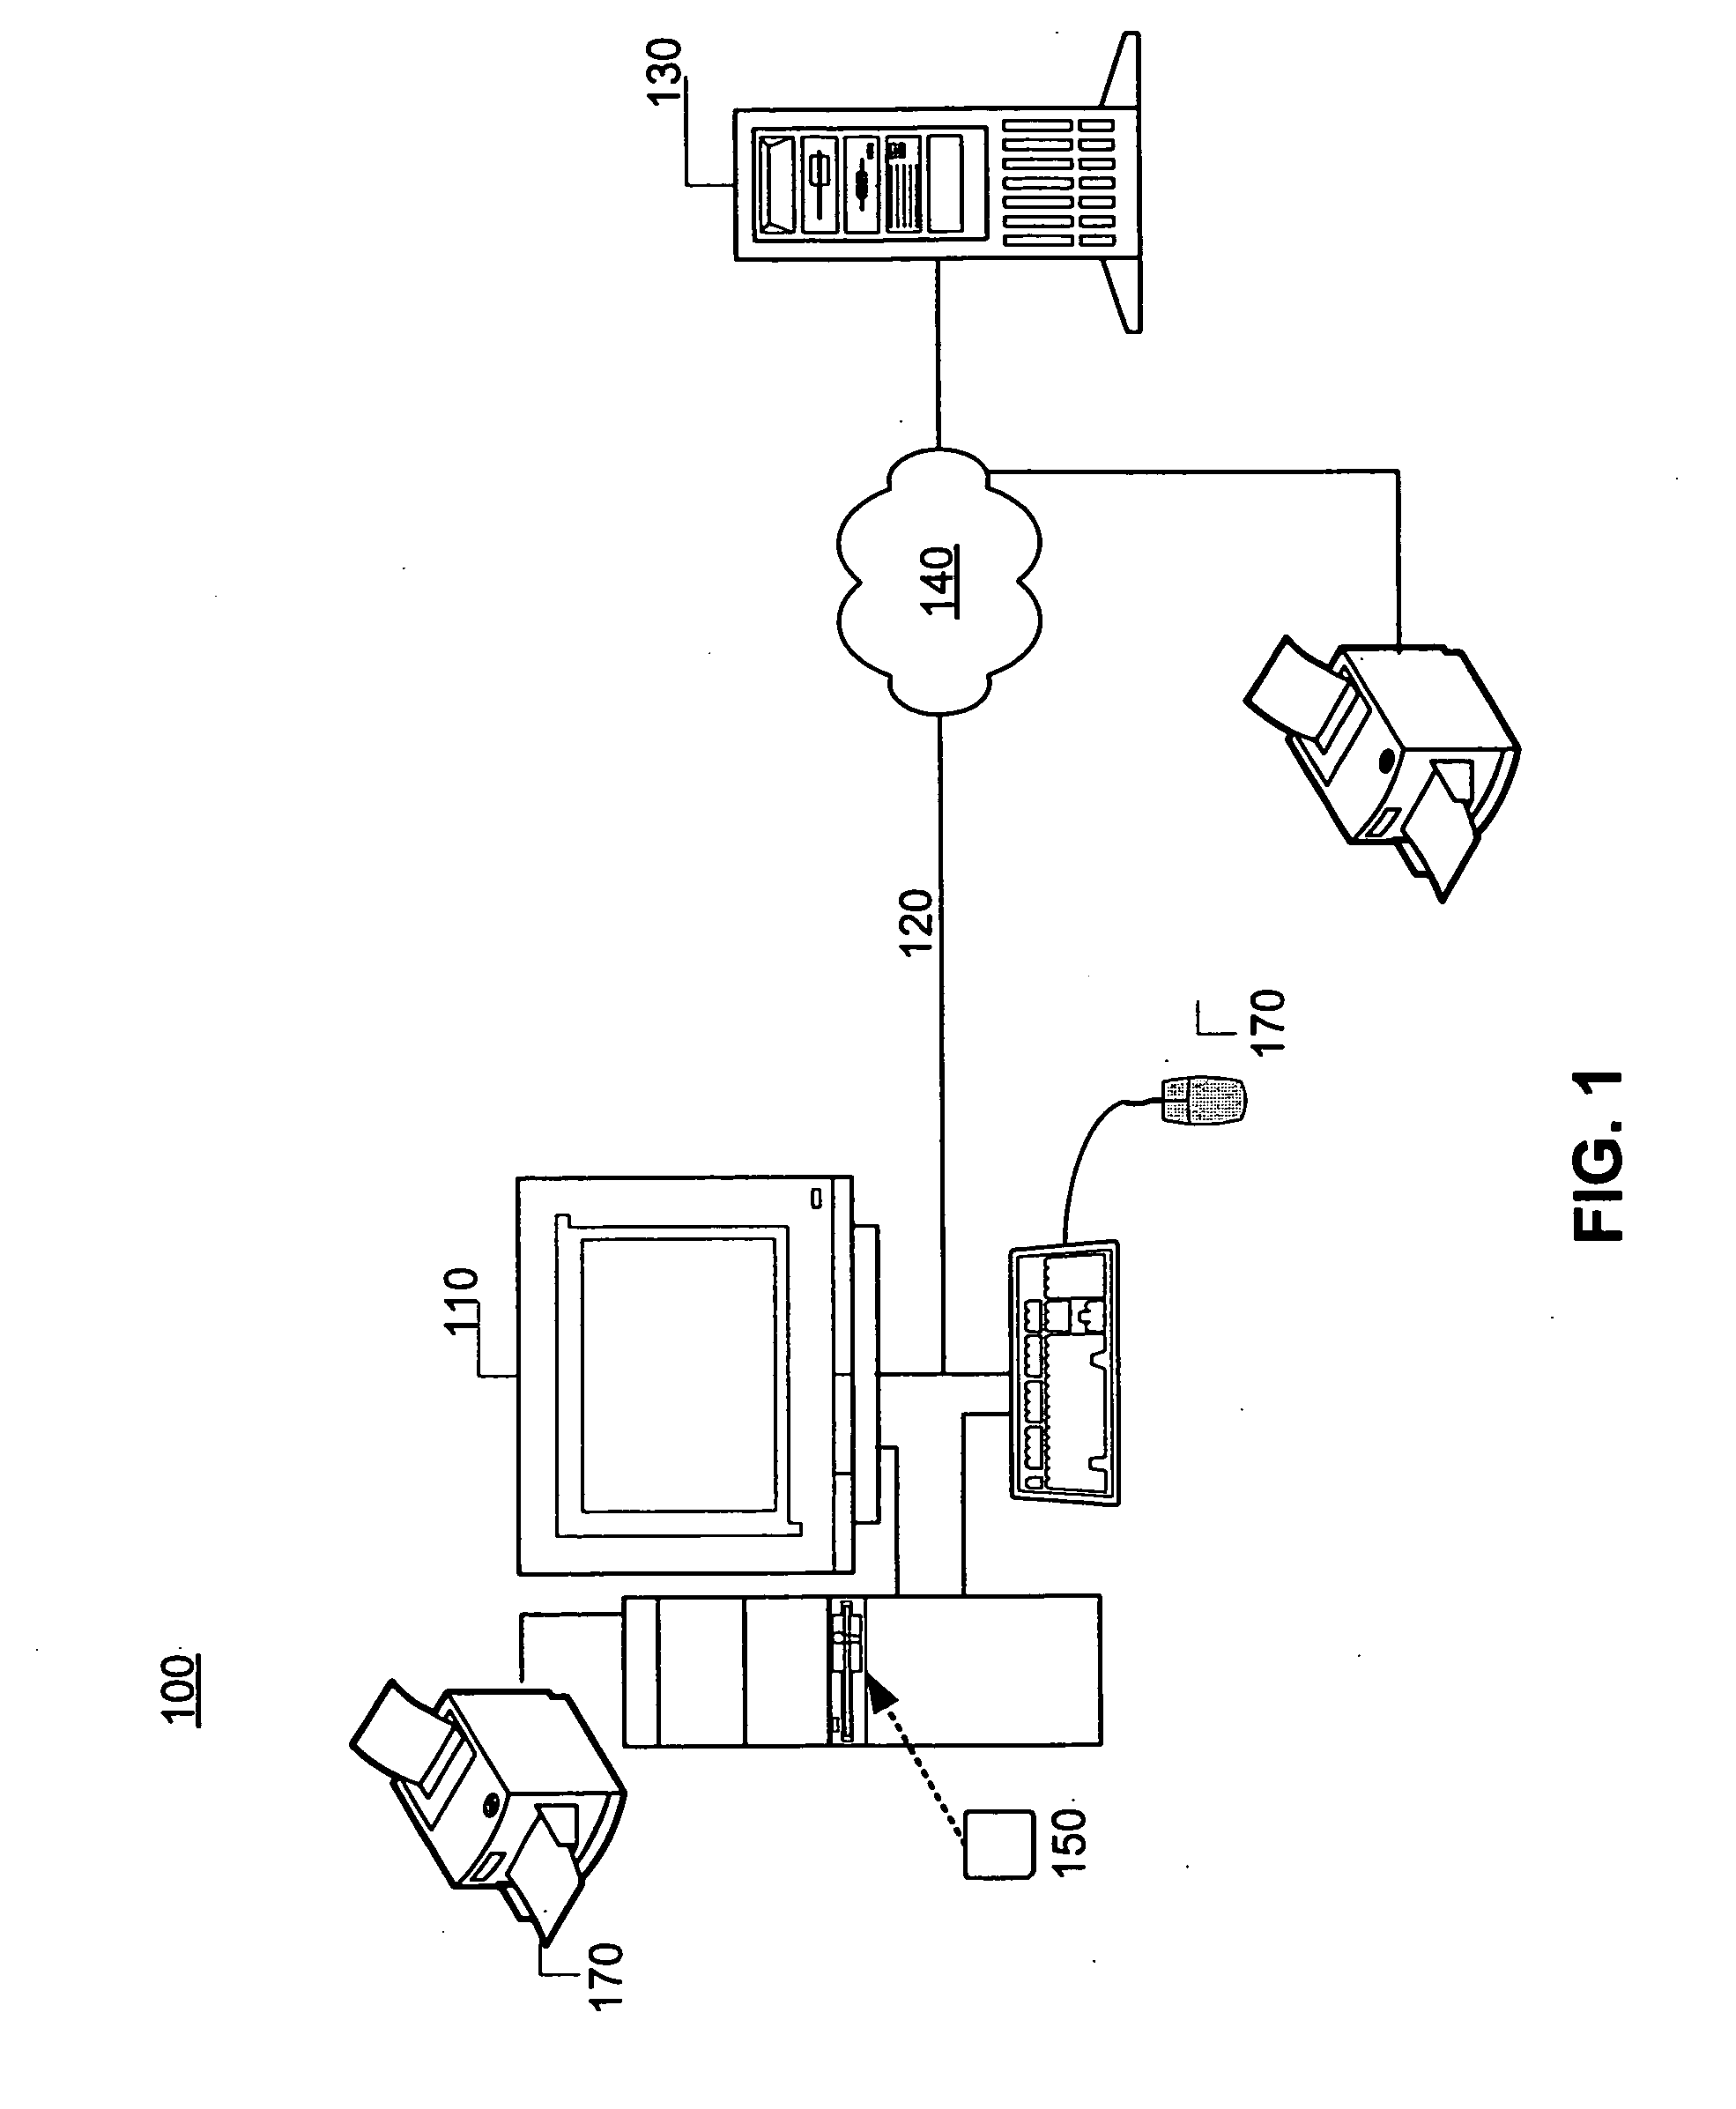 Systems and methods for display list management